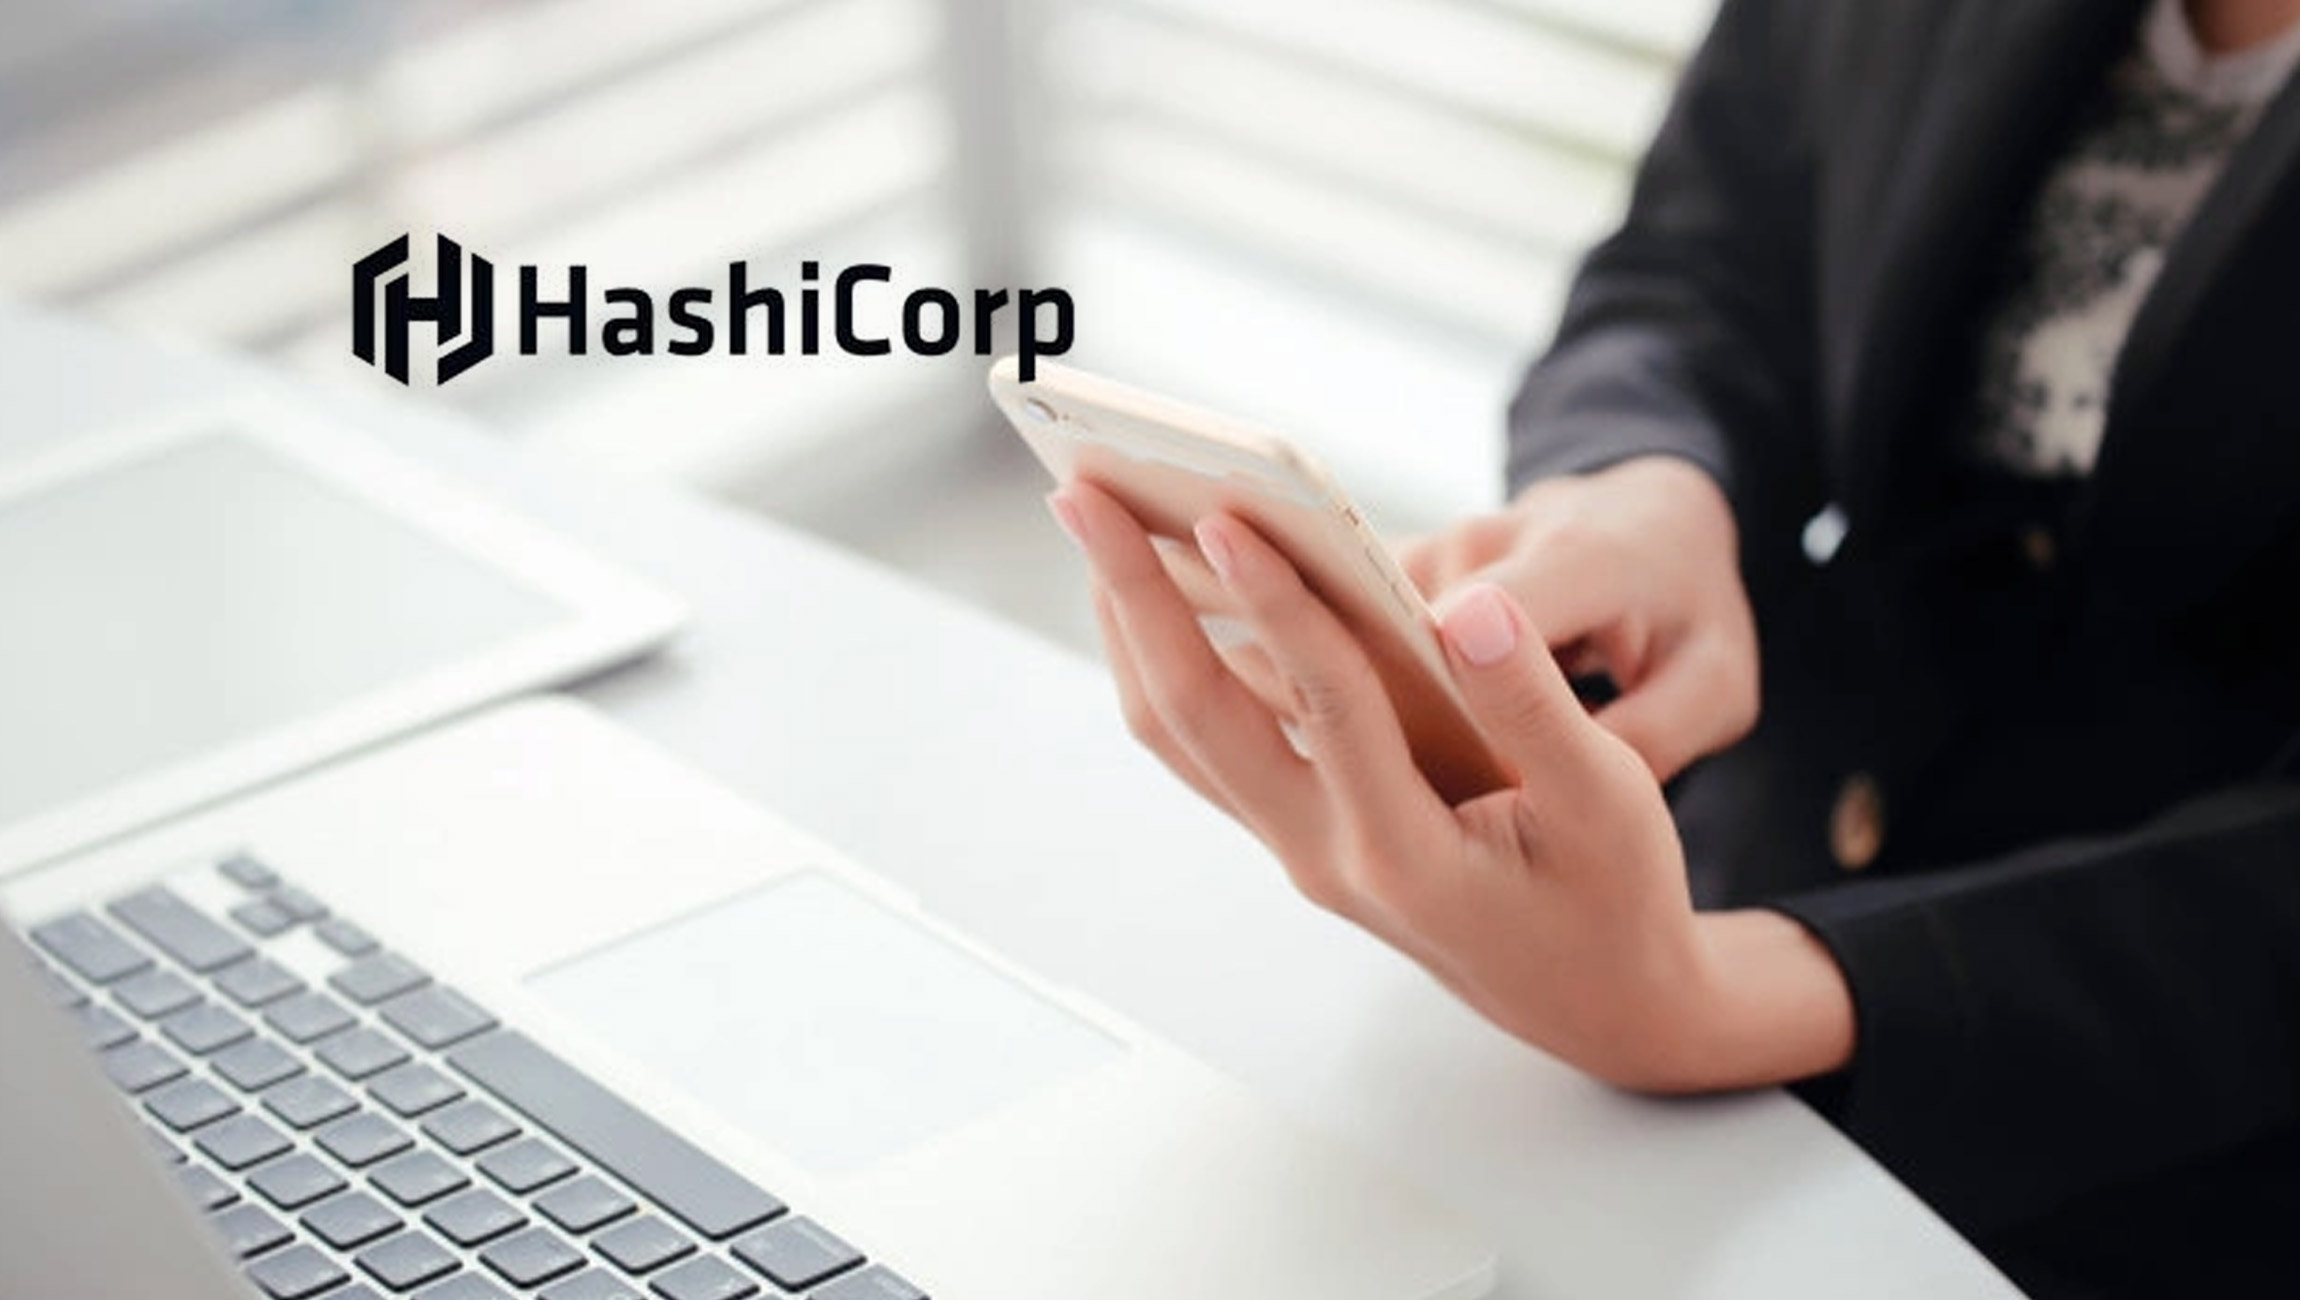 HashiCorp’s-Inaugural-State-of-Cloud-Strategy-Survey-Finds-76%-of-Enterprises-Have-Already-Adopted-a-Multi-Cloud-Strategy